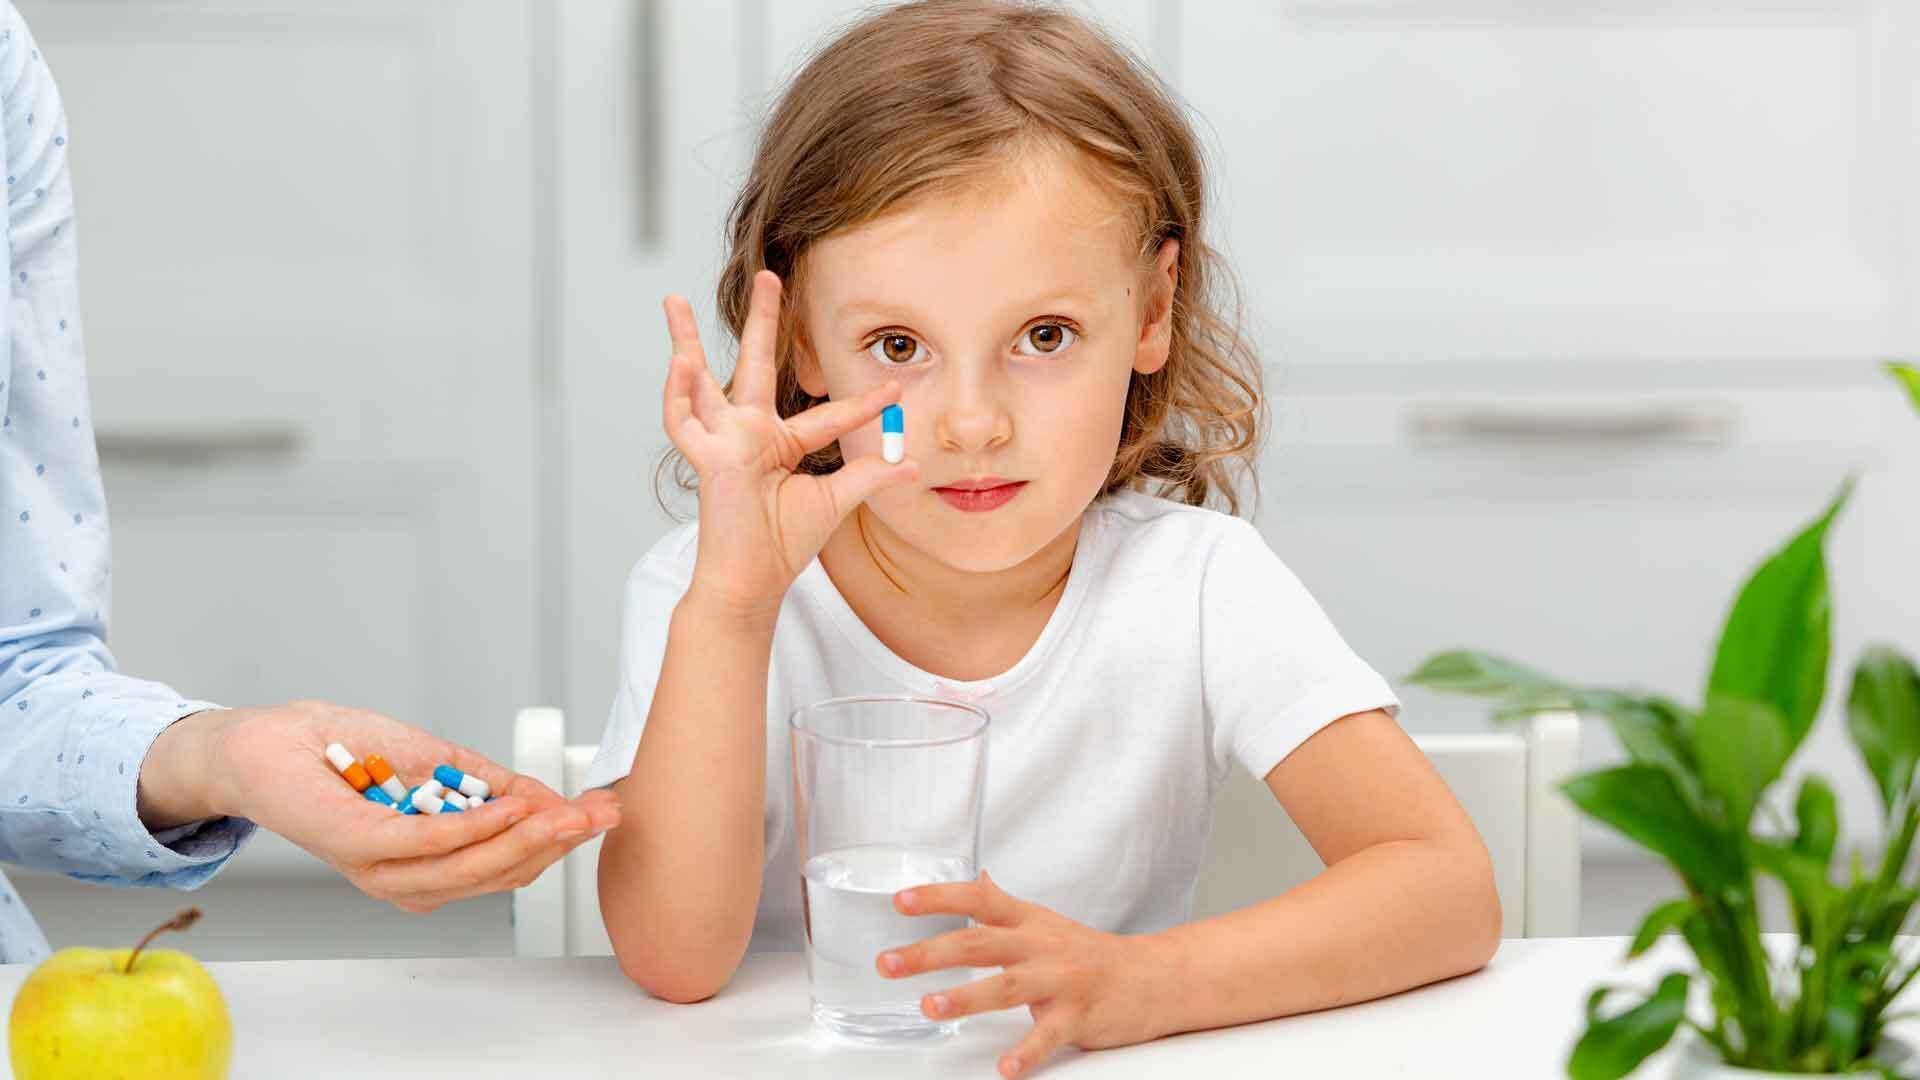 How does my child learn to swallow pills?